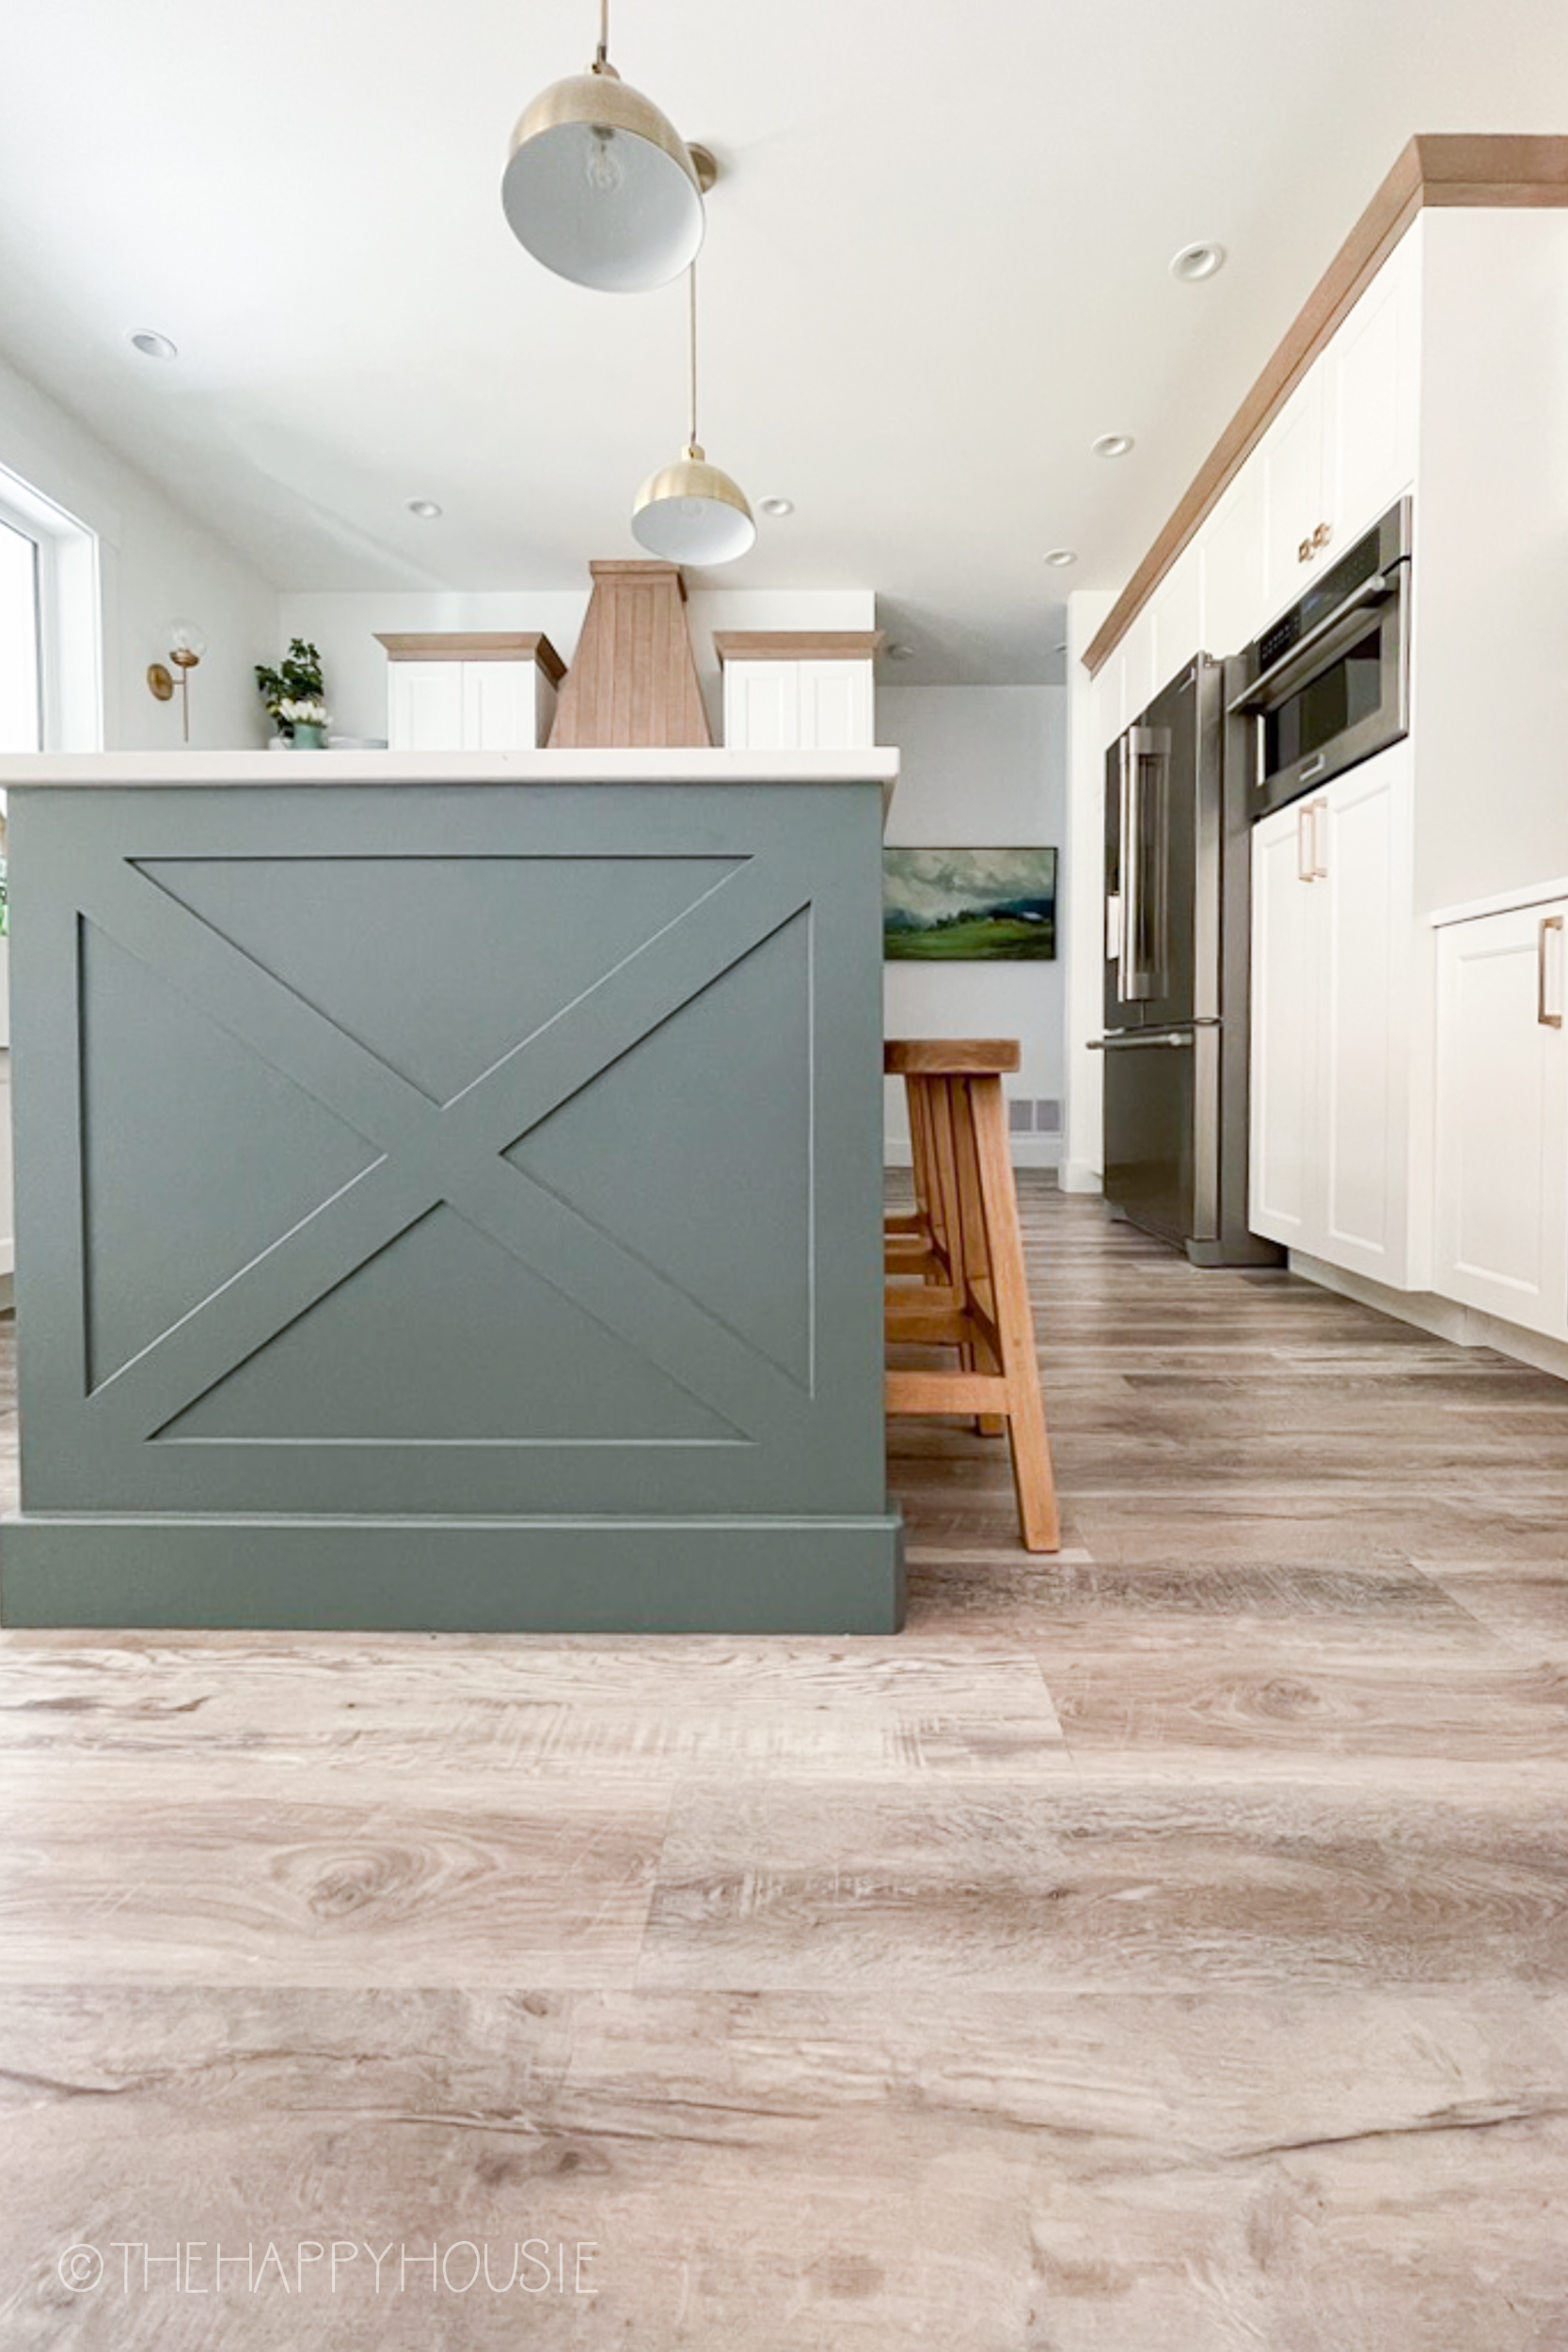 A kitchen island with an X style edge and light and bright vinyl plank kitchen flooring